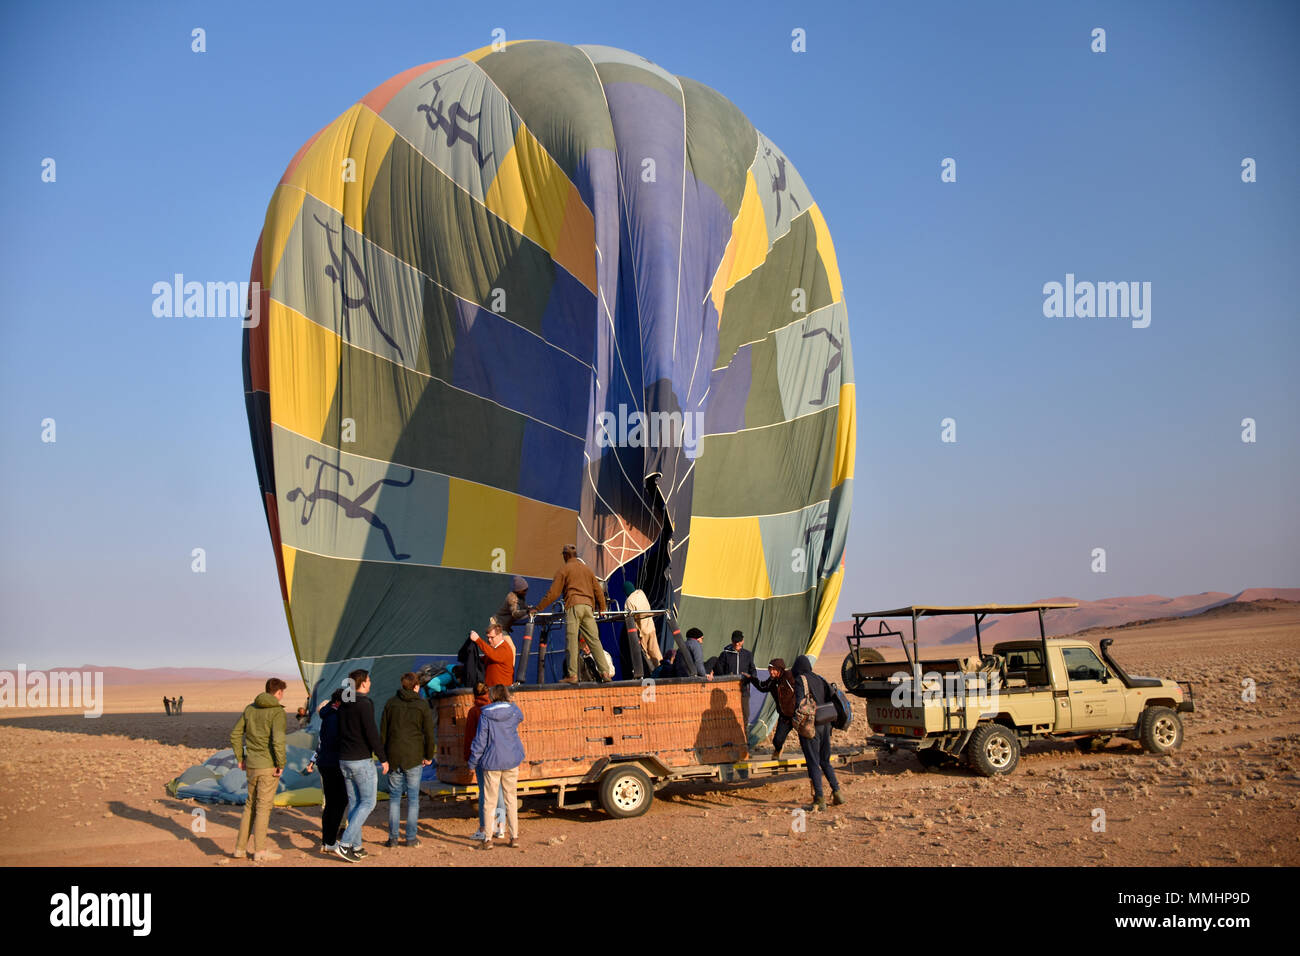 Hot air balloon lands on top of a car in the Namib Desert, Sossusvlei area, Sesriem, Namibia Stock Photo